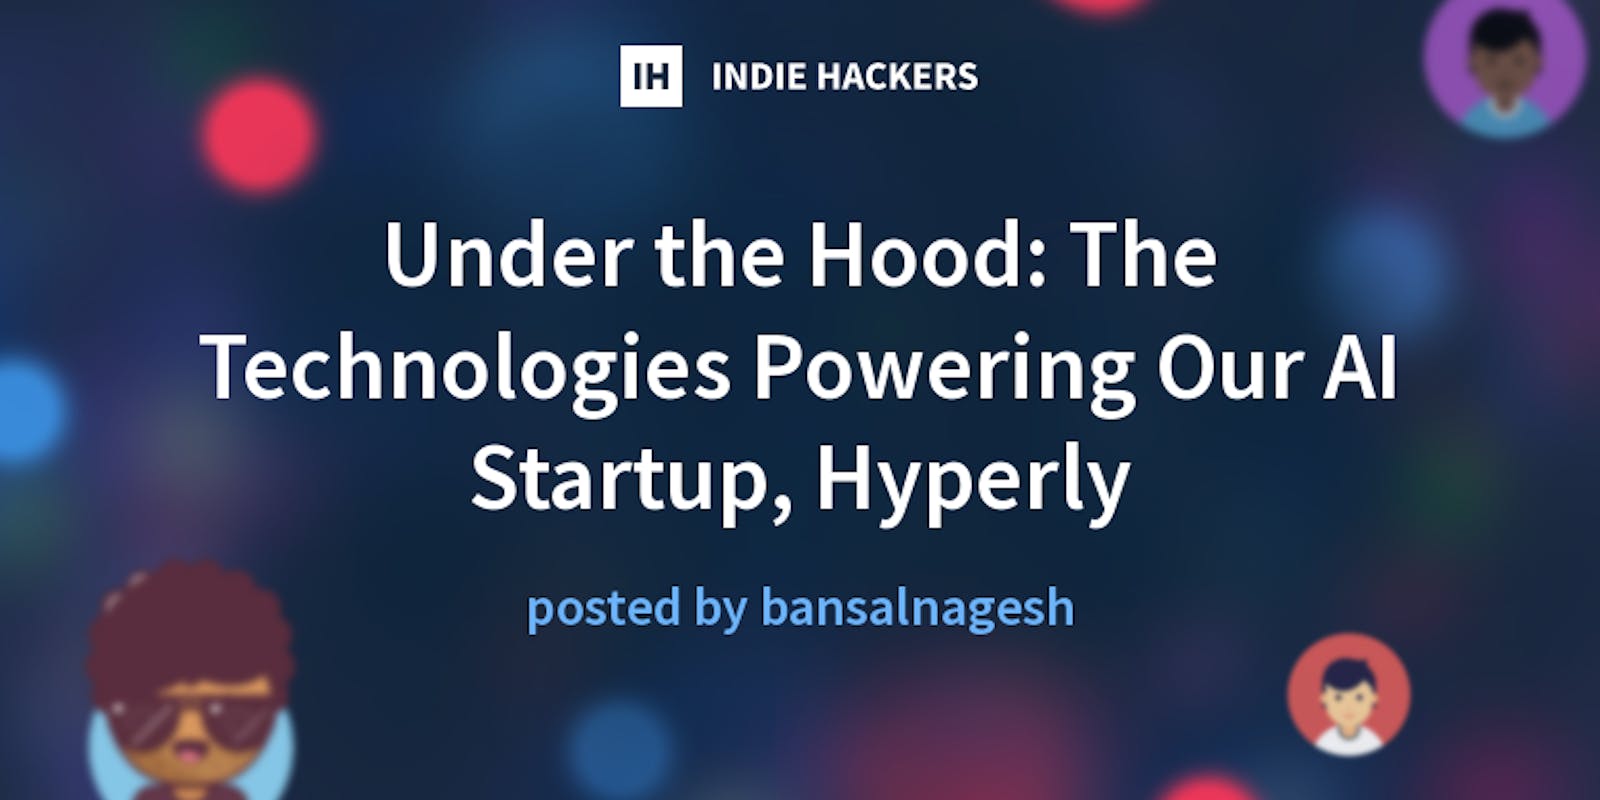 Under the Hood: The Technologies
Powering Our AI Startup, Hyperly